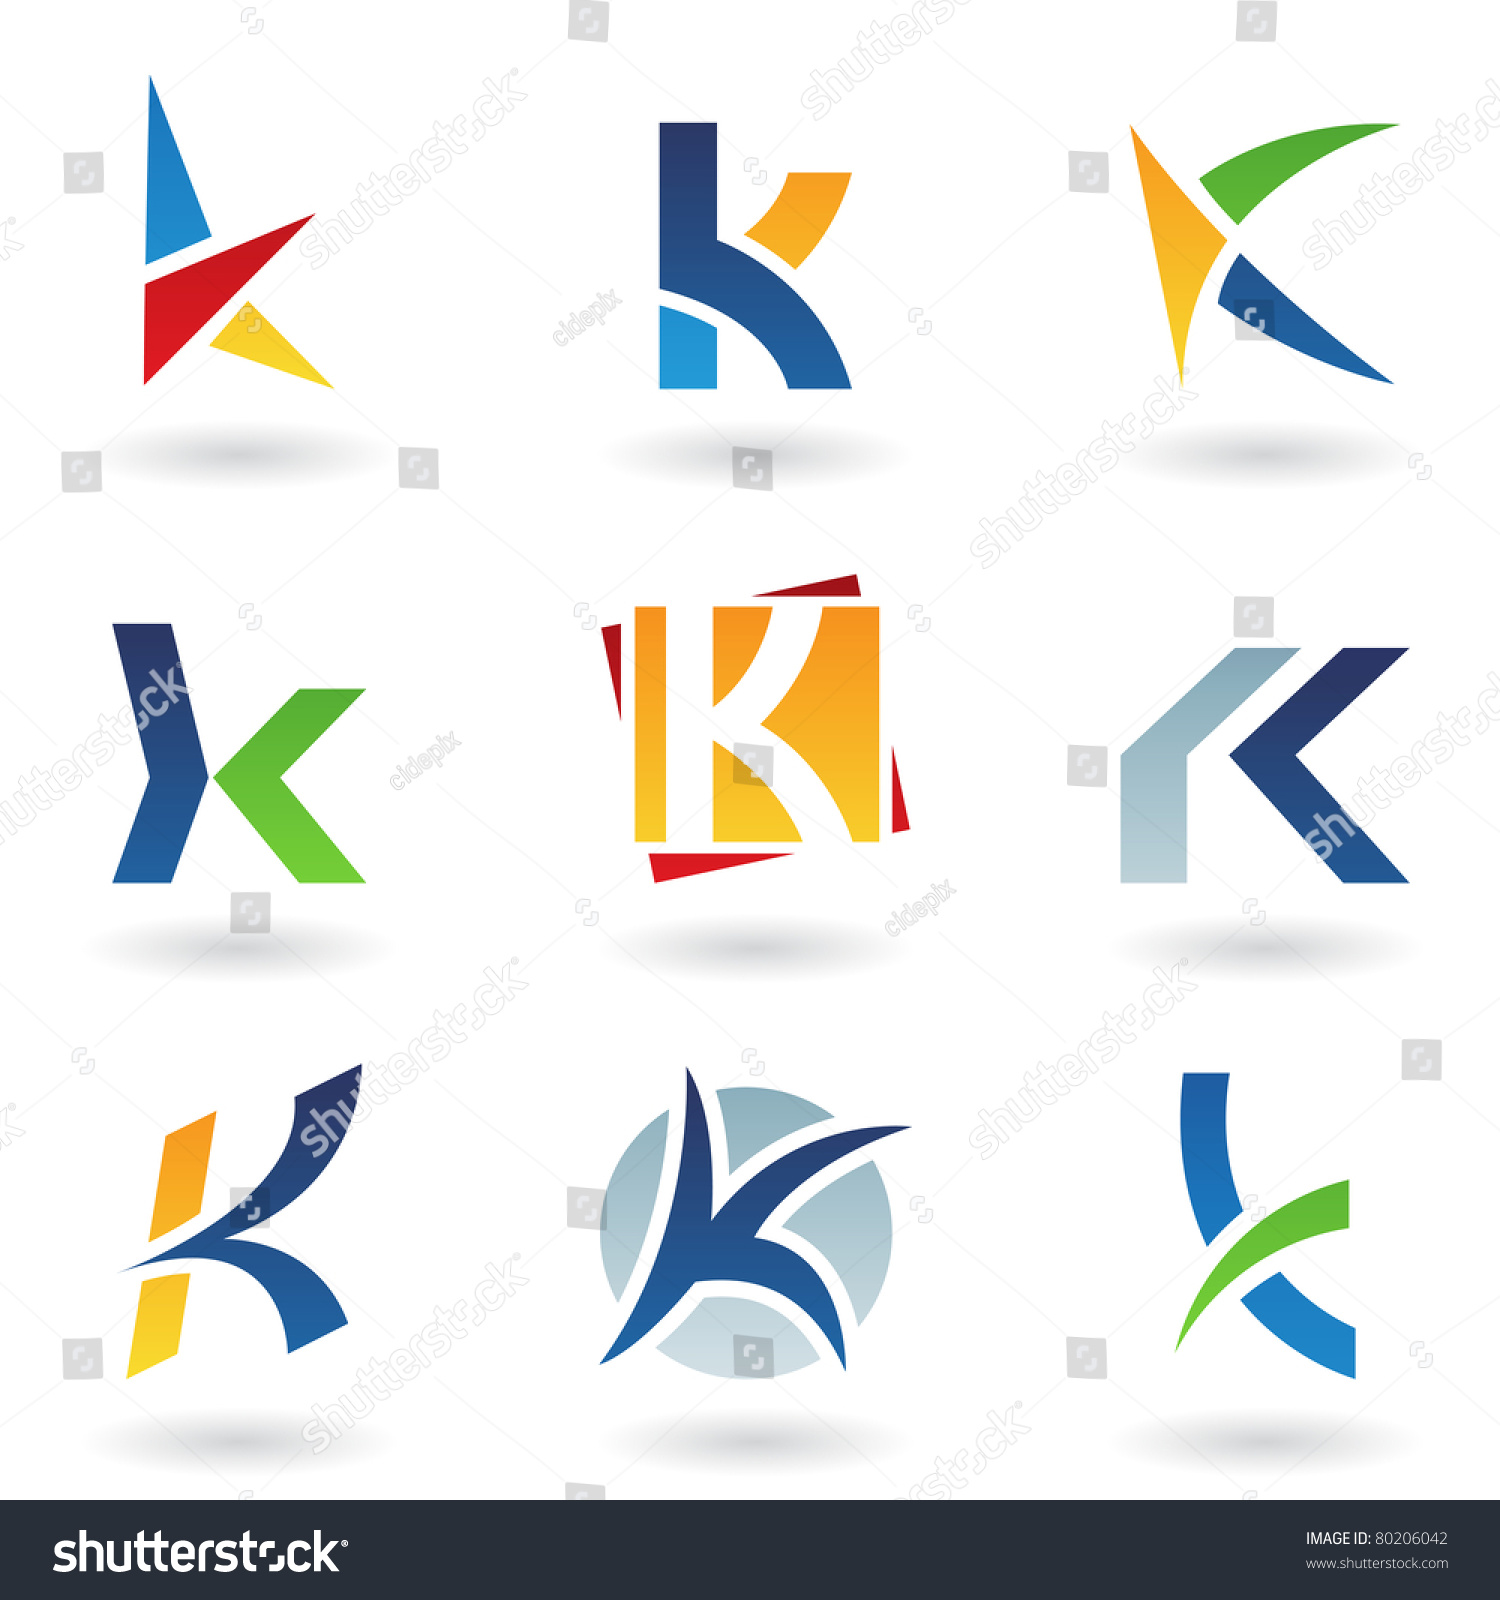 Vector Illustration Of Abstract Icons Based On The Letter K - 80206042